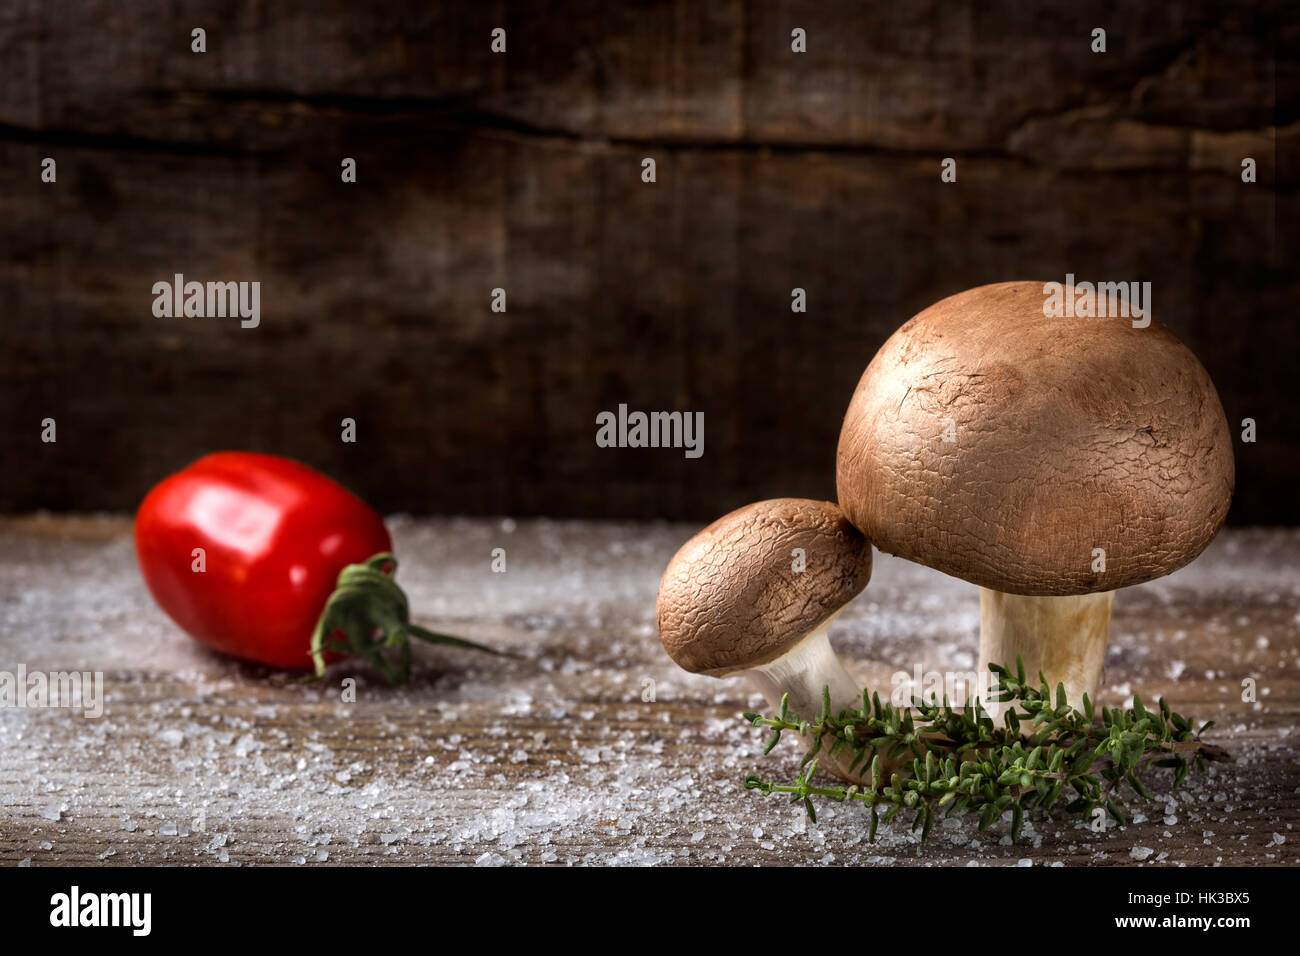 Two brown mushrooms with salt, thyme and one tomato out of focus over wooden background Stock Photo